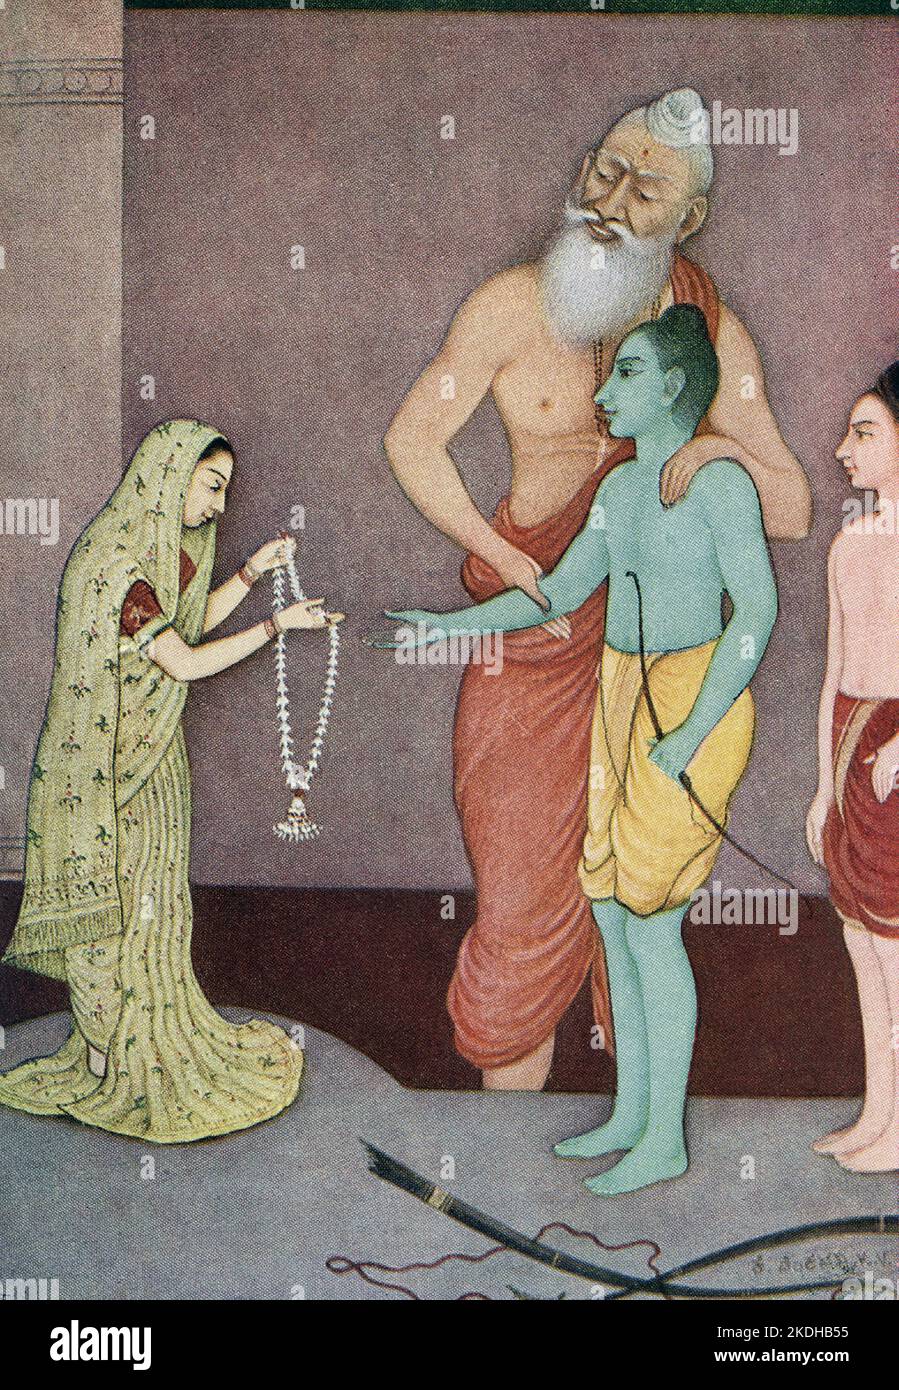 This print showing Rama's Marriage dates to 1913. According to the Ramayana, Lord Shiva had gifted a celestial bow to King Janaka of Mithila. King Janaka set the condition that he would marry his daughter Sita to the person who would be able to string Pinaka, the bow of Lord Shiva. In the assembly of the court of King Janaka, Rama effortlessly lifted the bow and stringed it, and then, stretching the bowstring to examine its tautness, Rama unintentionally broke the bow, the sound of its breaking resounded like thunder and the earth trembled. Stock Photo